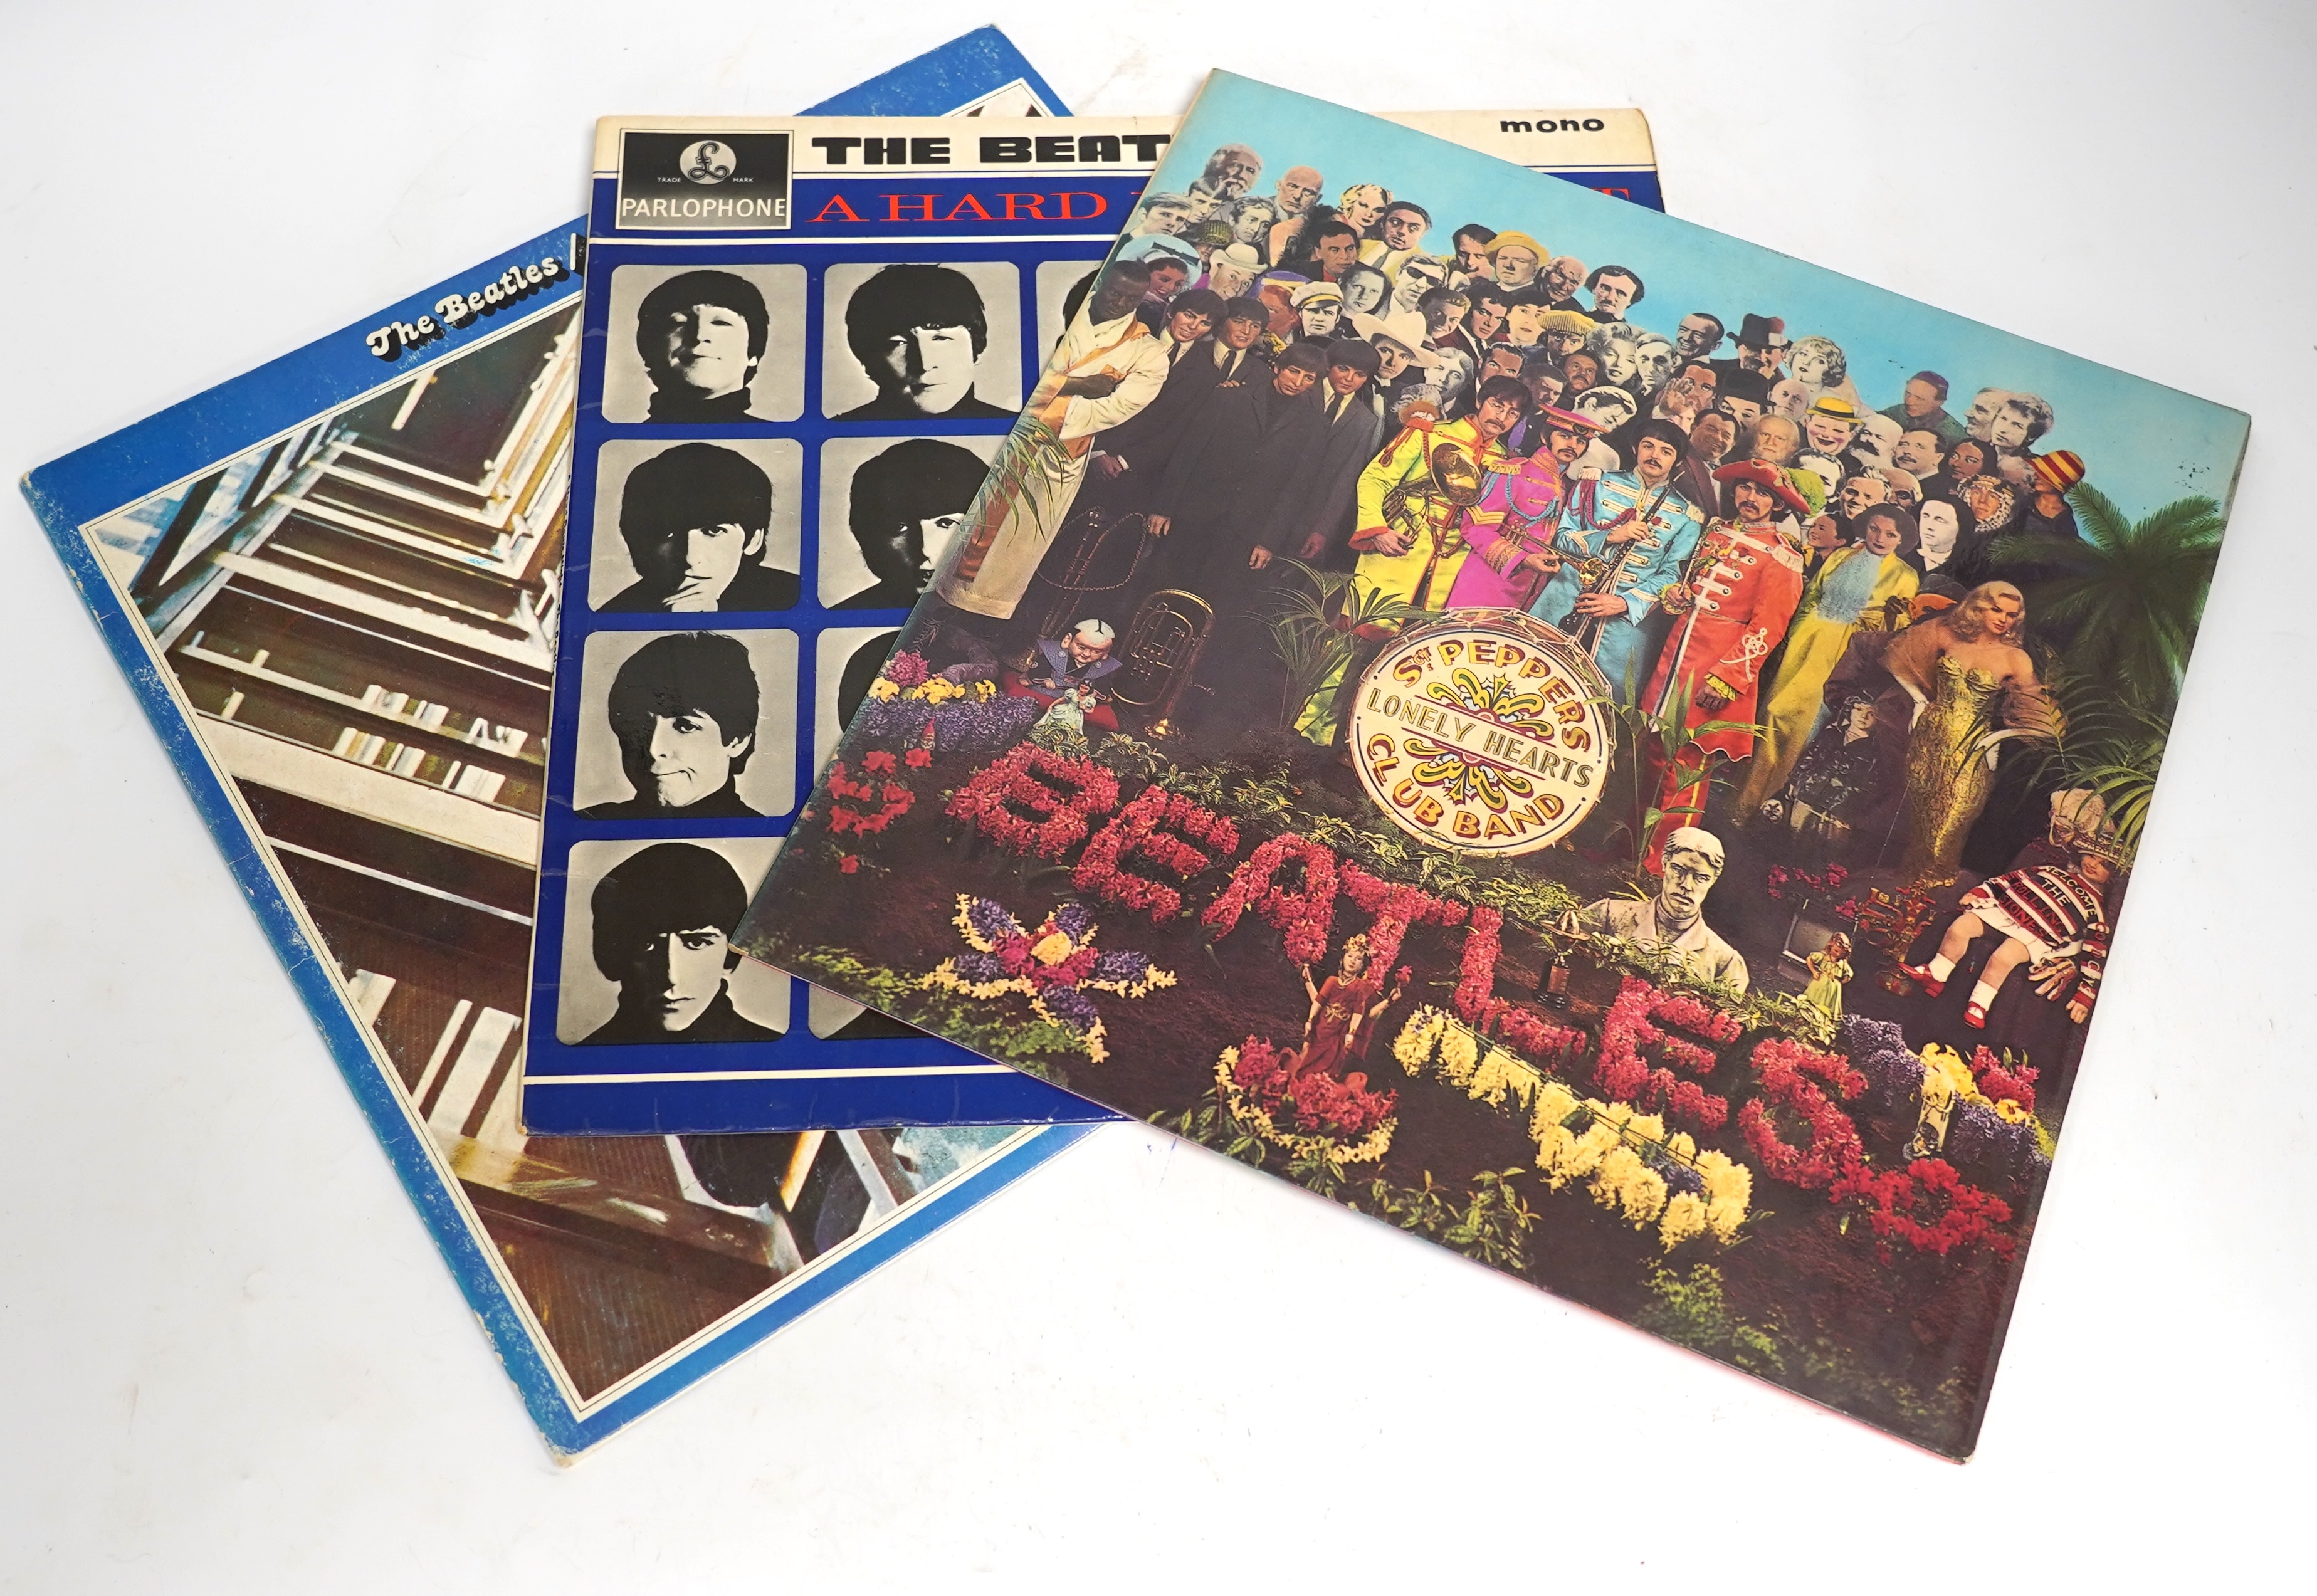 Eight Beatles and Paul McCartney LP record albums including; St. Pepper (with card insert), A Hard Day’s Night, XEX.481, The Beatles 1967-1970, Abbey Road, Rubber Soul, Venus and Mars, London Town, Pipes of Peace